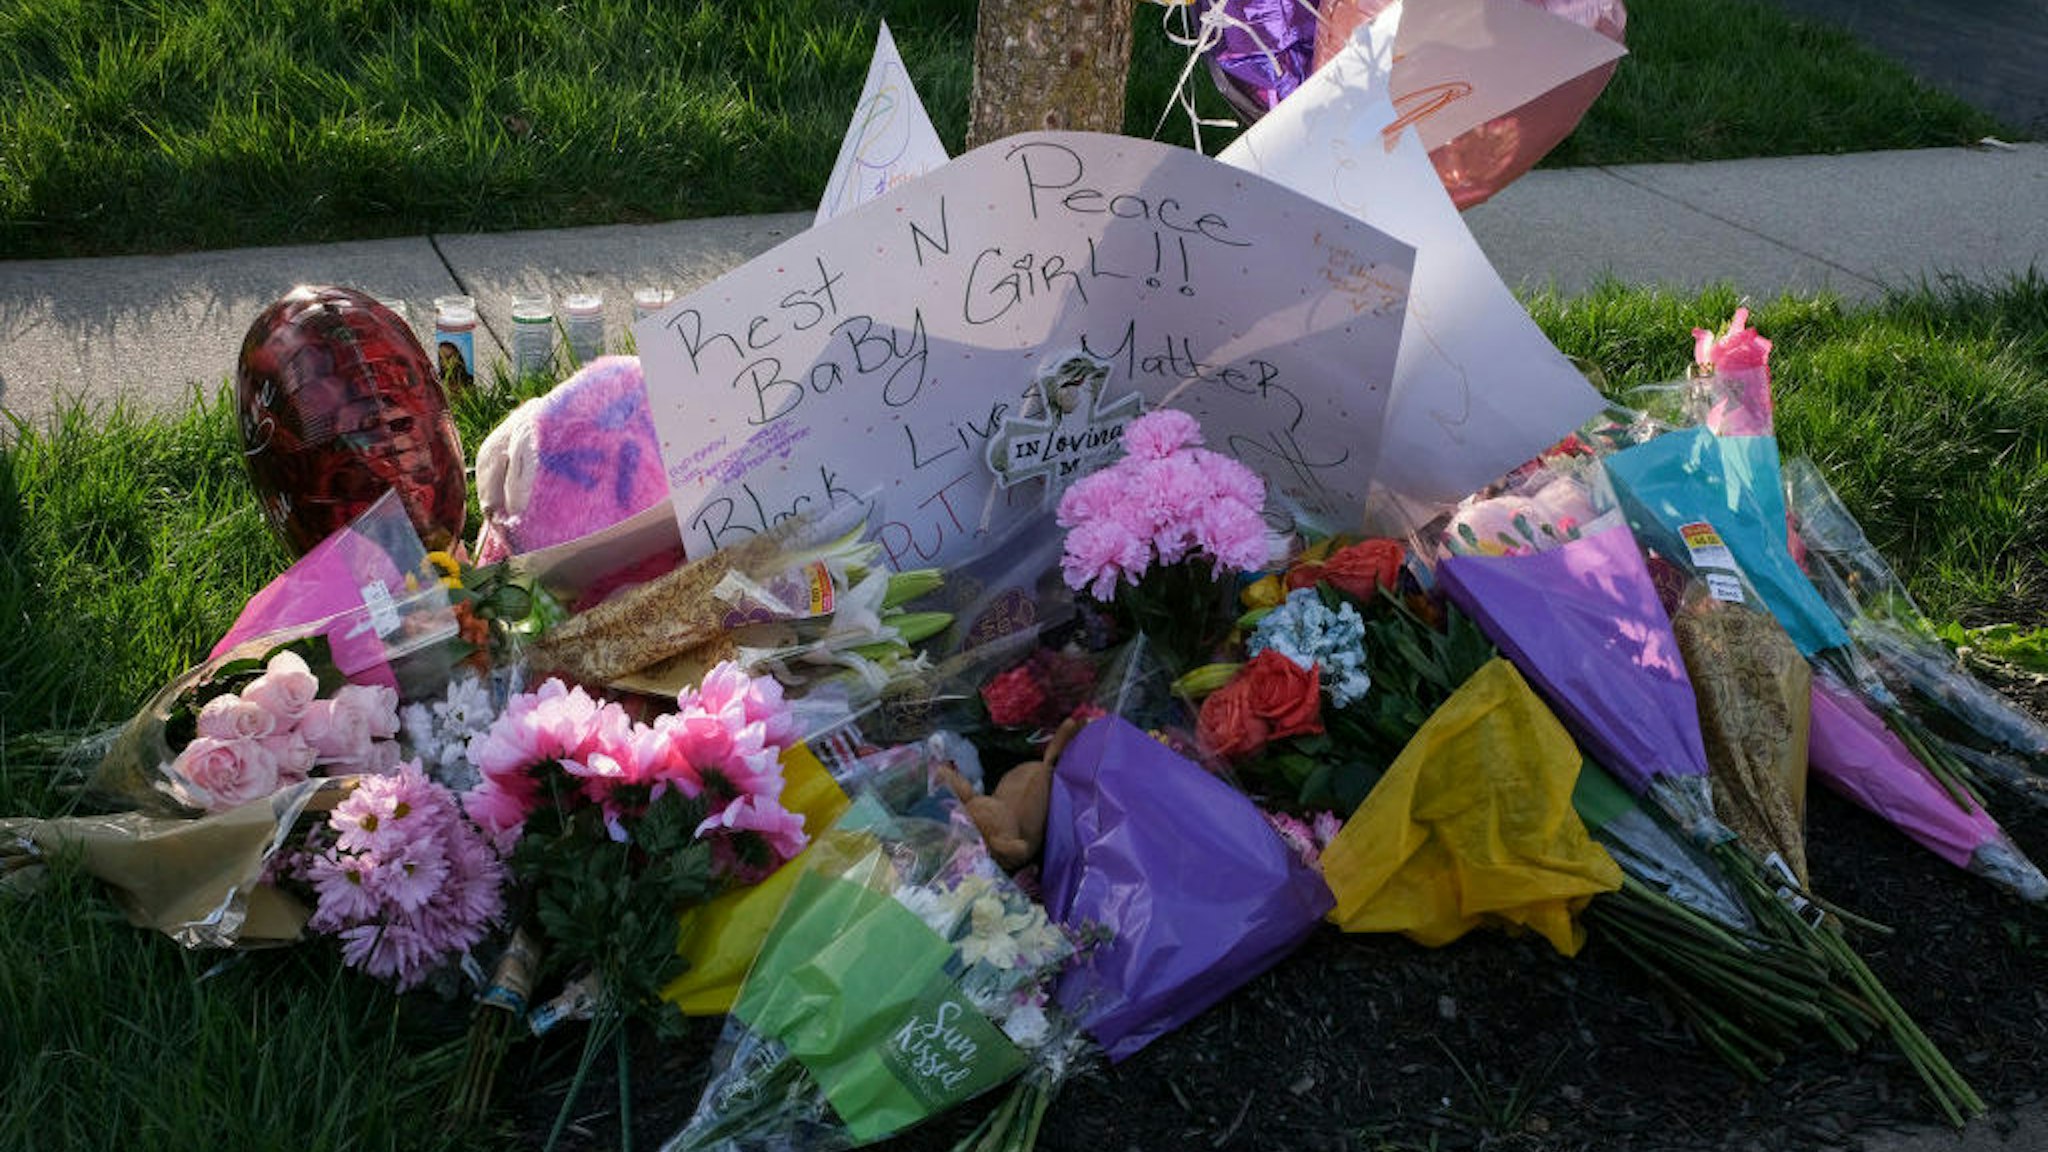 A pop-up memorial sits at the site where a Columbus Police Department officer shot and killed Ma'Khia Bryant, 16, in Columbus, Ohio on April 21, 2021. - Police in the US state of Ohio fatally shot a Black teenager who appeared to be lunging at another person with a knife, less than an hour before former officer Derek Chauvin was convicted of murdering George Floyd.